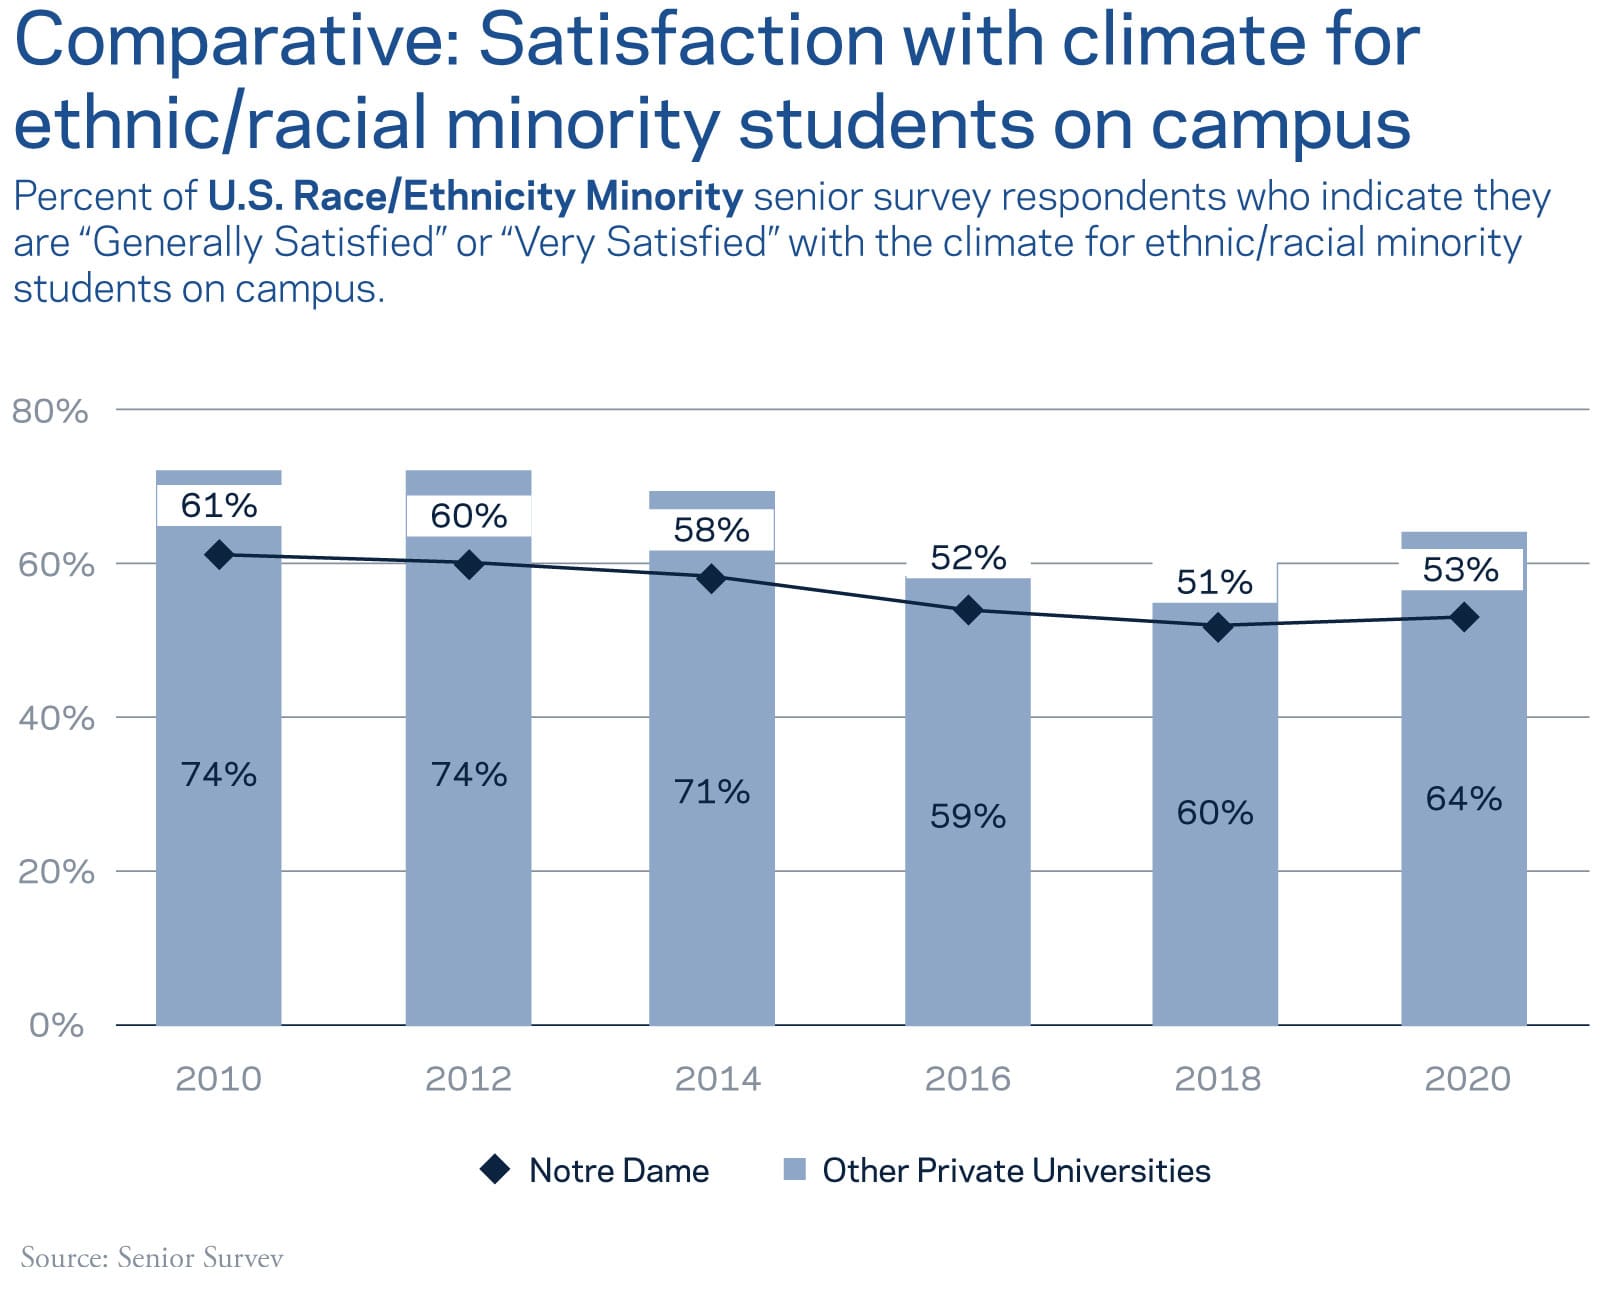 Comparative: Satisfaction with climate for ethnic/racial minority students on campus - Percent of U.S. Race/Ethnicity Minority senior survey respondents who indicate they are Generally Satisfied or Very Satisfied with the climate for ethnic/racial minority students on campus.